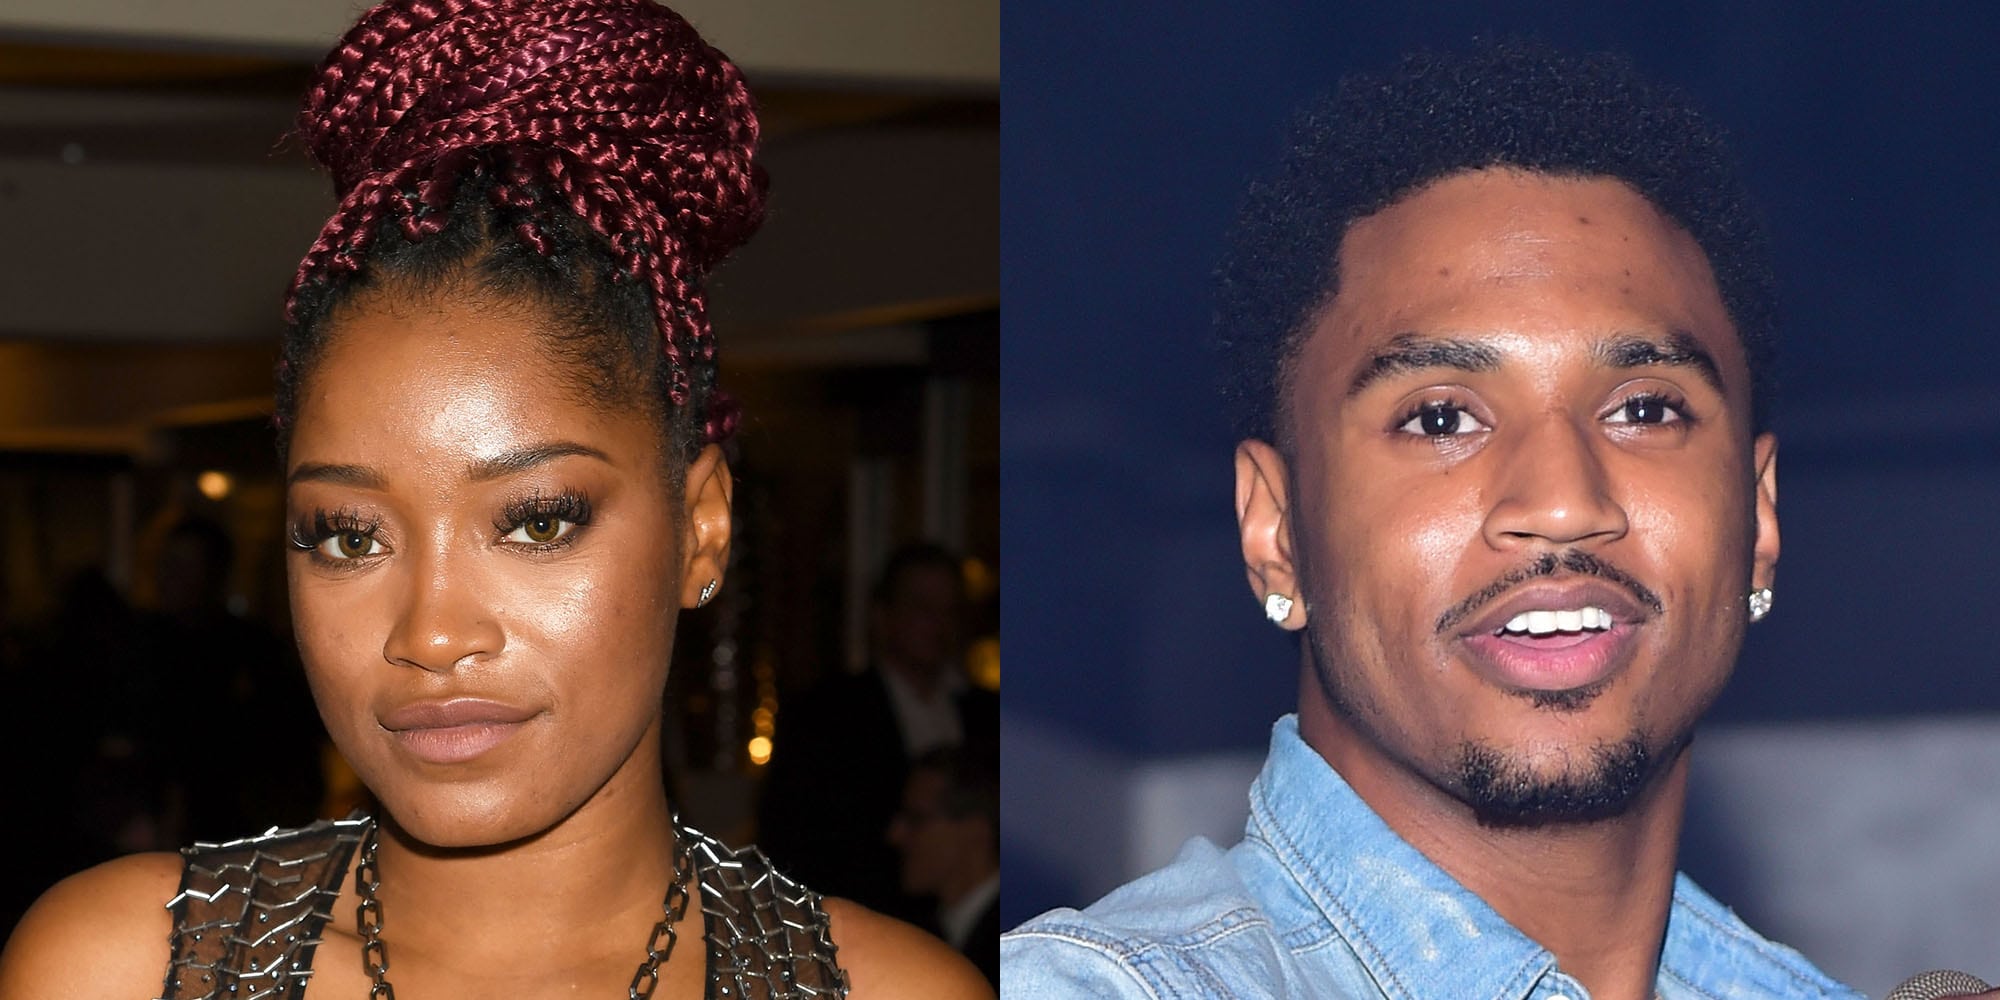 Trey Songz Used A Cameo Of KeKe Palmer Without Her Permission| Throwback